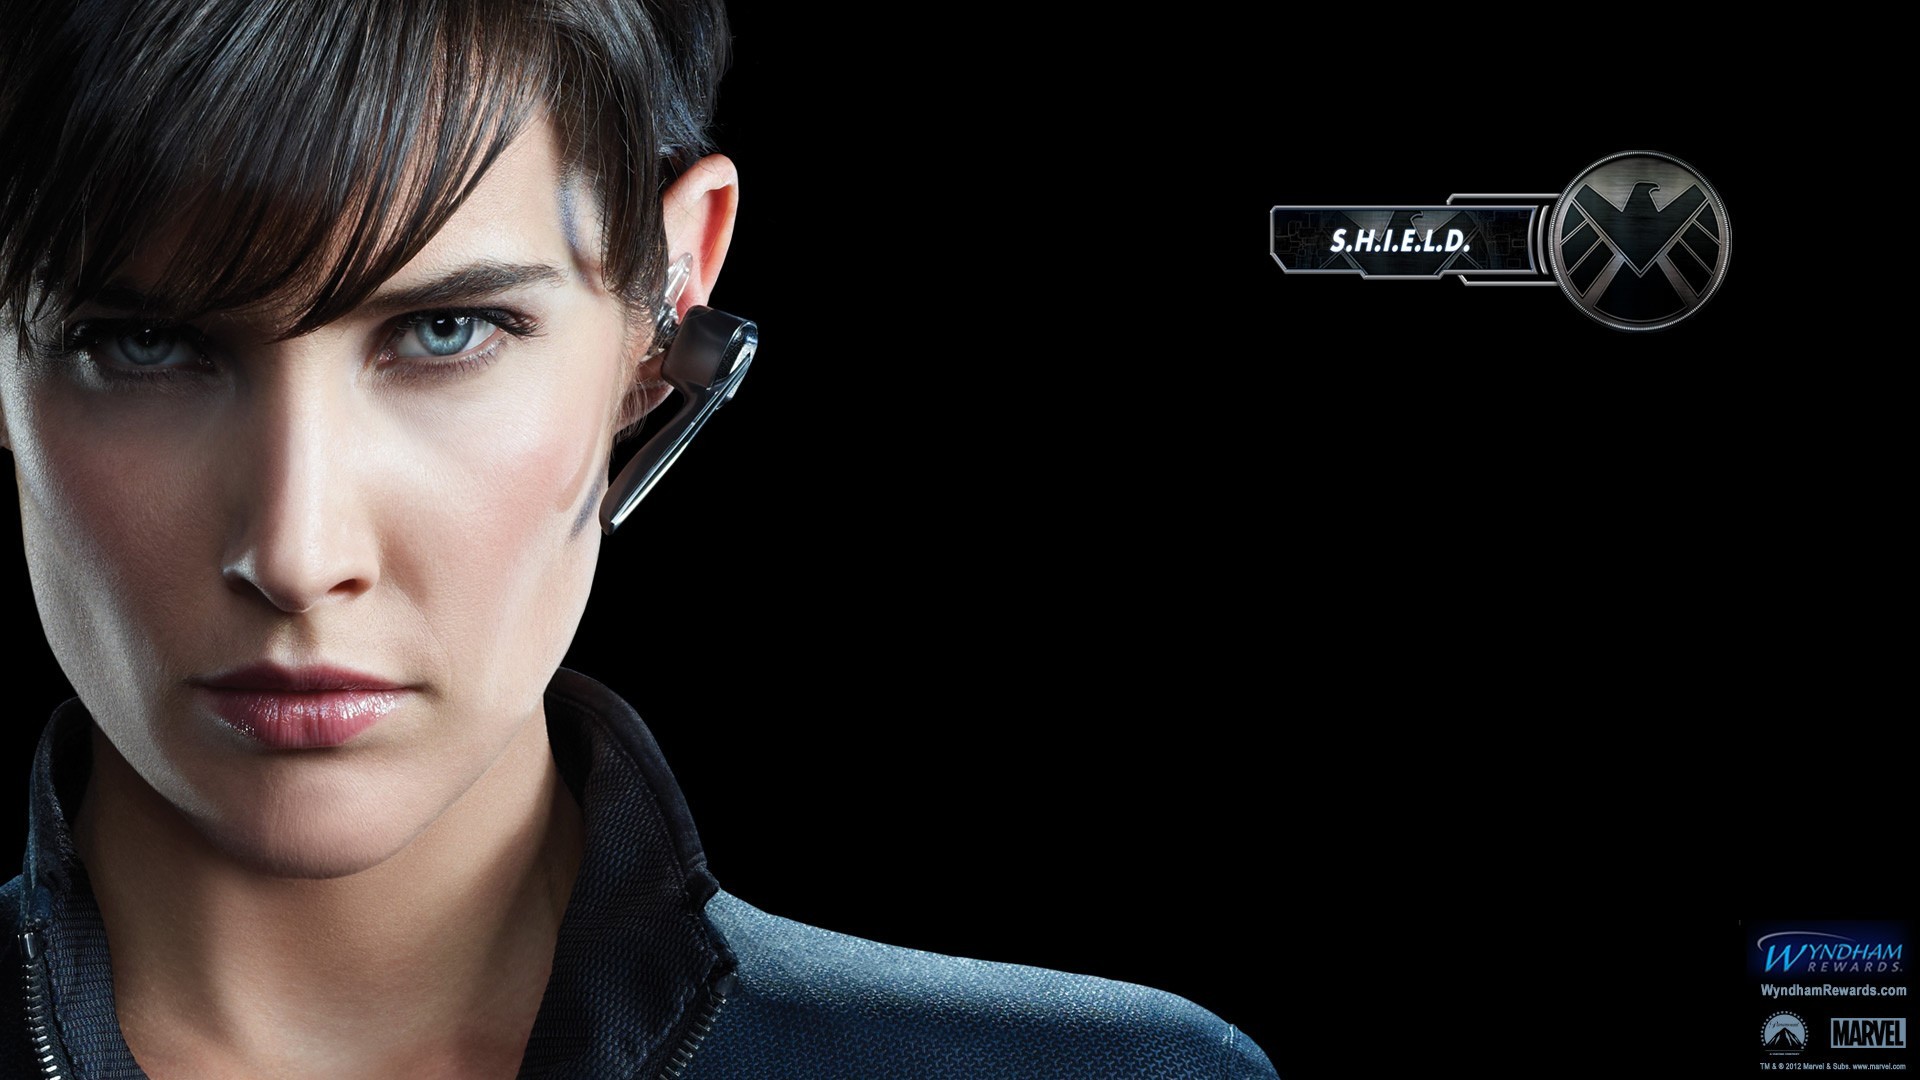 movies, The Avengers, Maria Hill, Cobie Smulders, S.H.I.E.L.D. Wallpaper HD / Desktop and Mobile Background